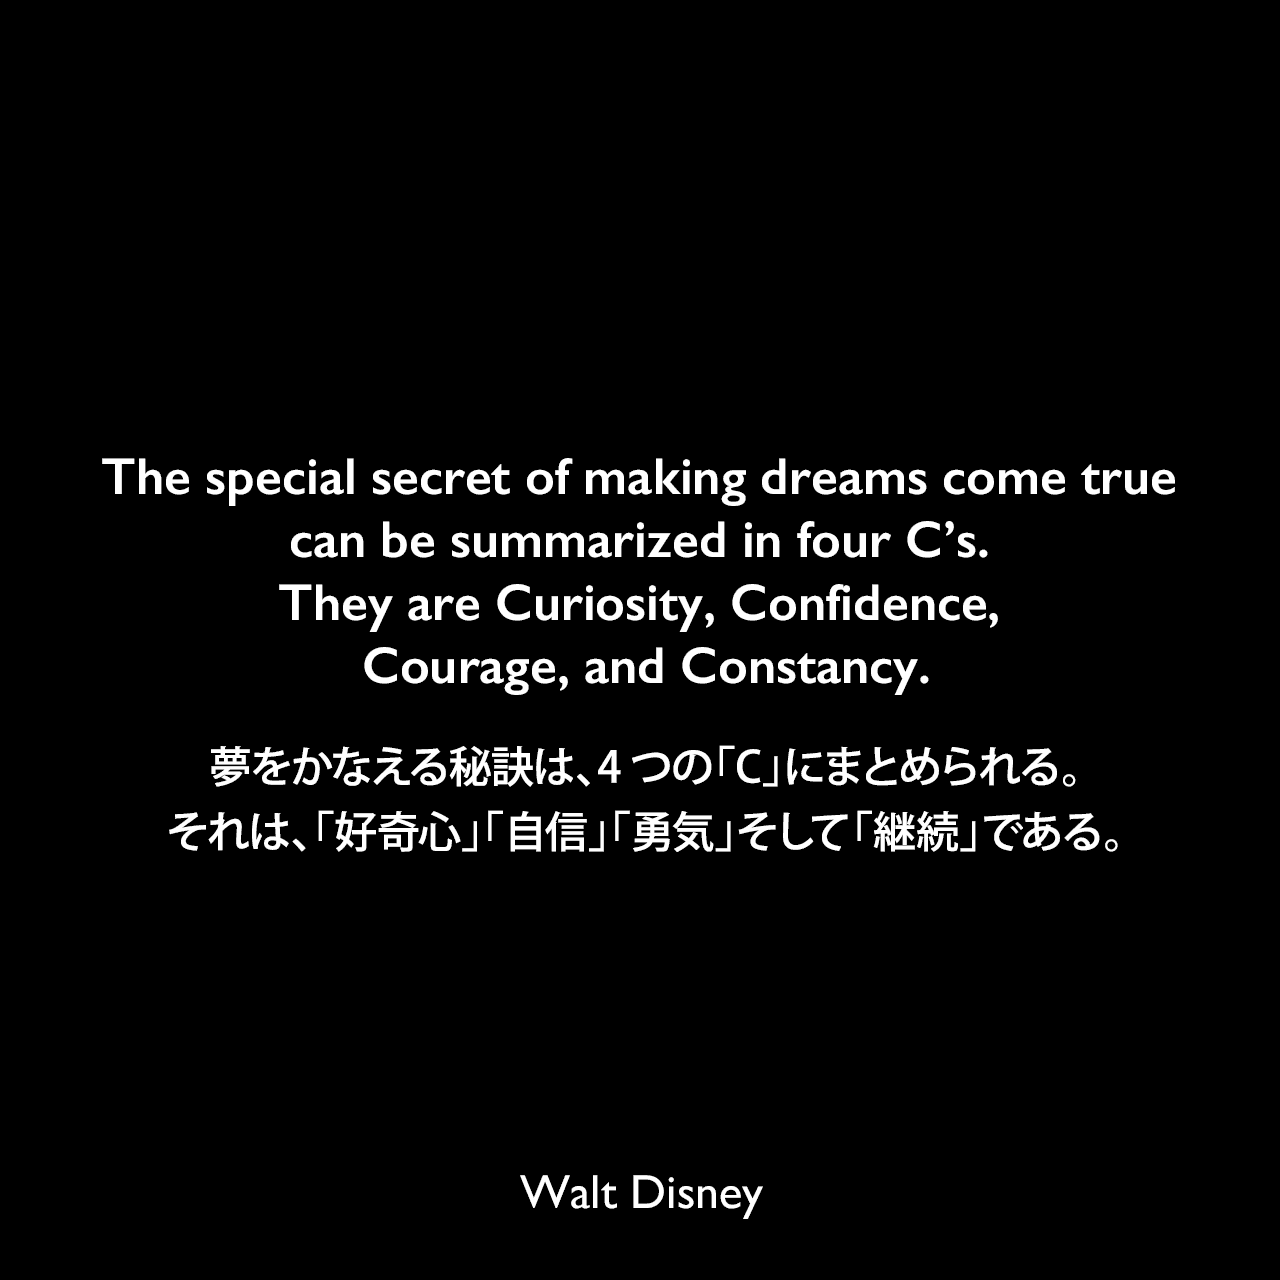 The special secret of making dreams come true can be summarized in four C’s. They are Curiosity, Confidence, Courage, and Constancy.夢をかなえる秘訣は、4つの「C」にまとめられる。それは、「好奇心」「自信」「勇気」そして「継続」である。